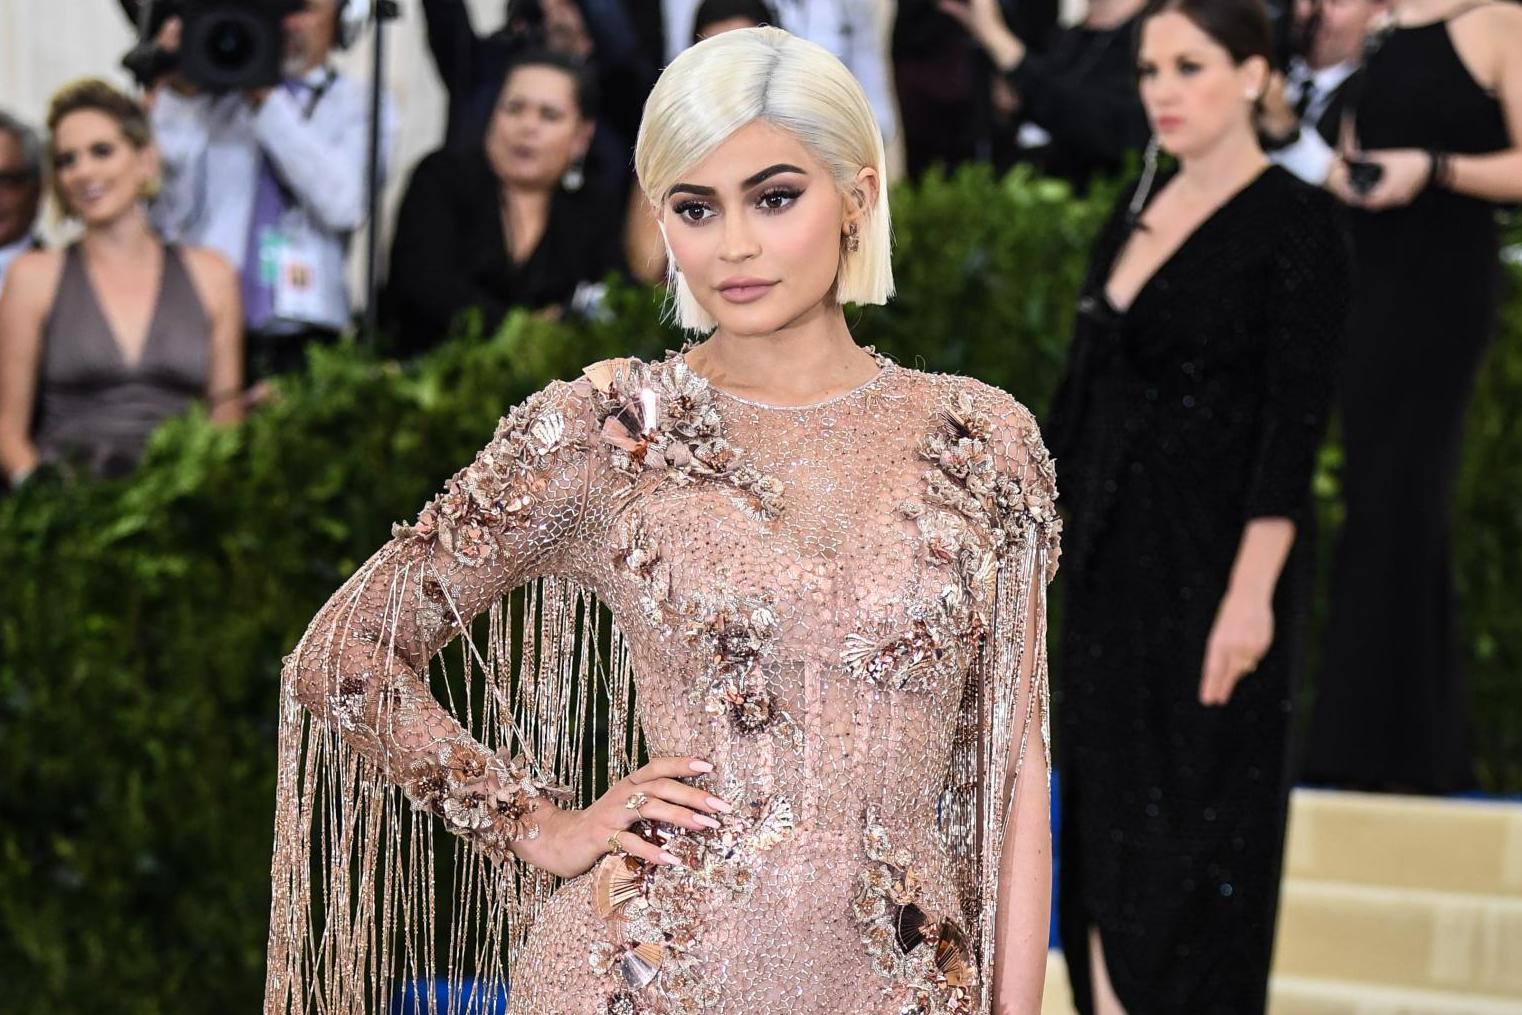 Kylie Jenner's Instagram Posts Are Worth Millions